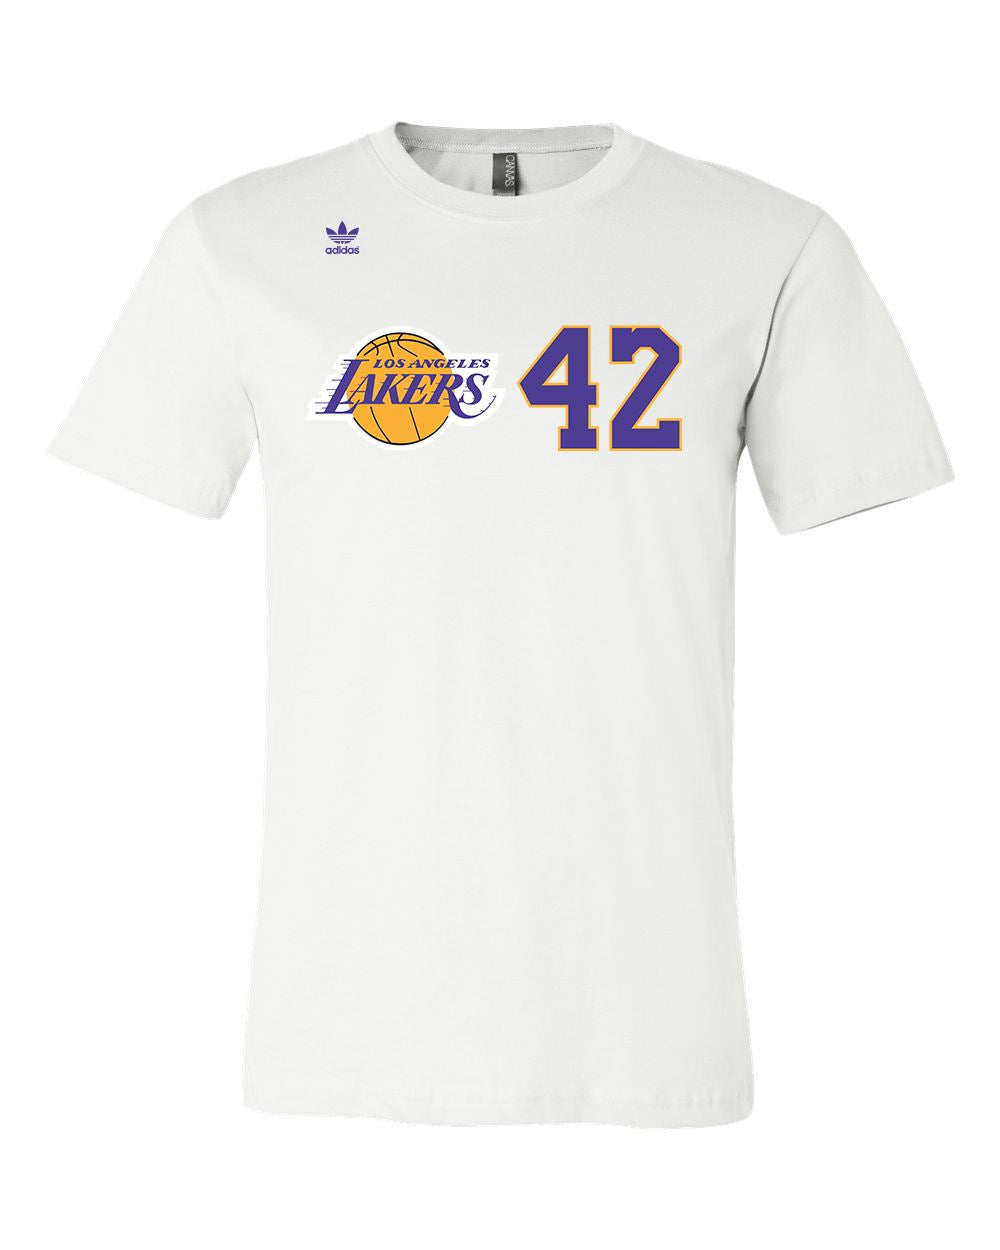 James Worthy #42 Los Angeles Lakers T-Shirt